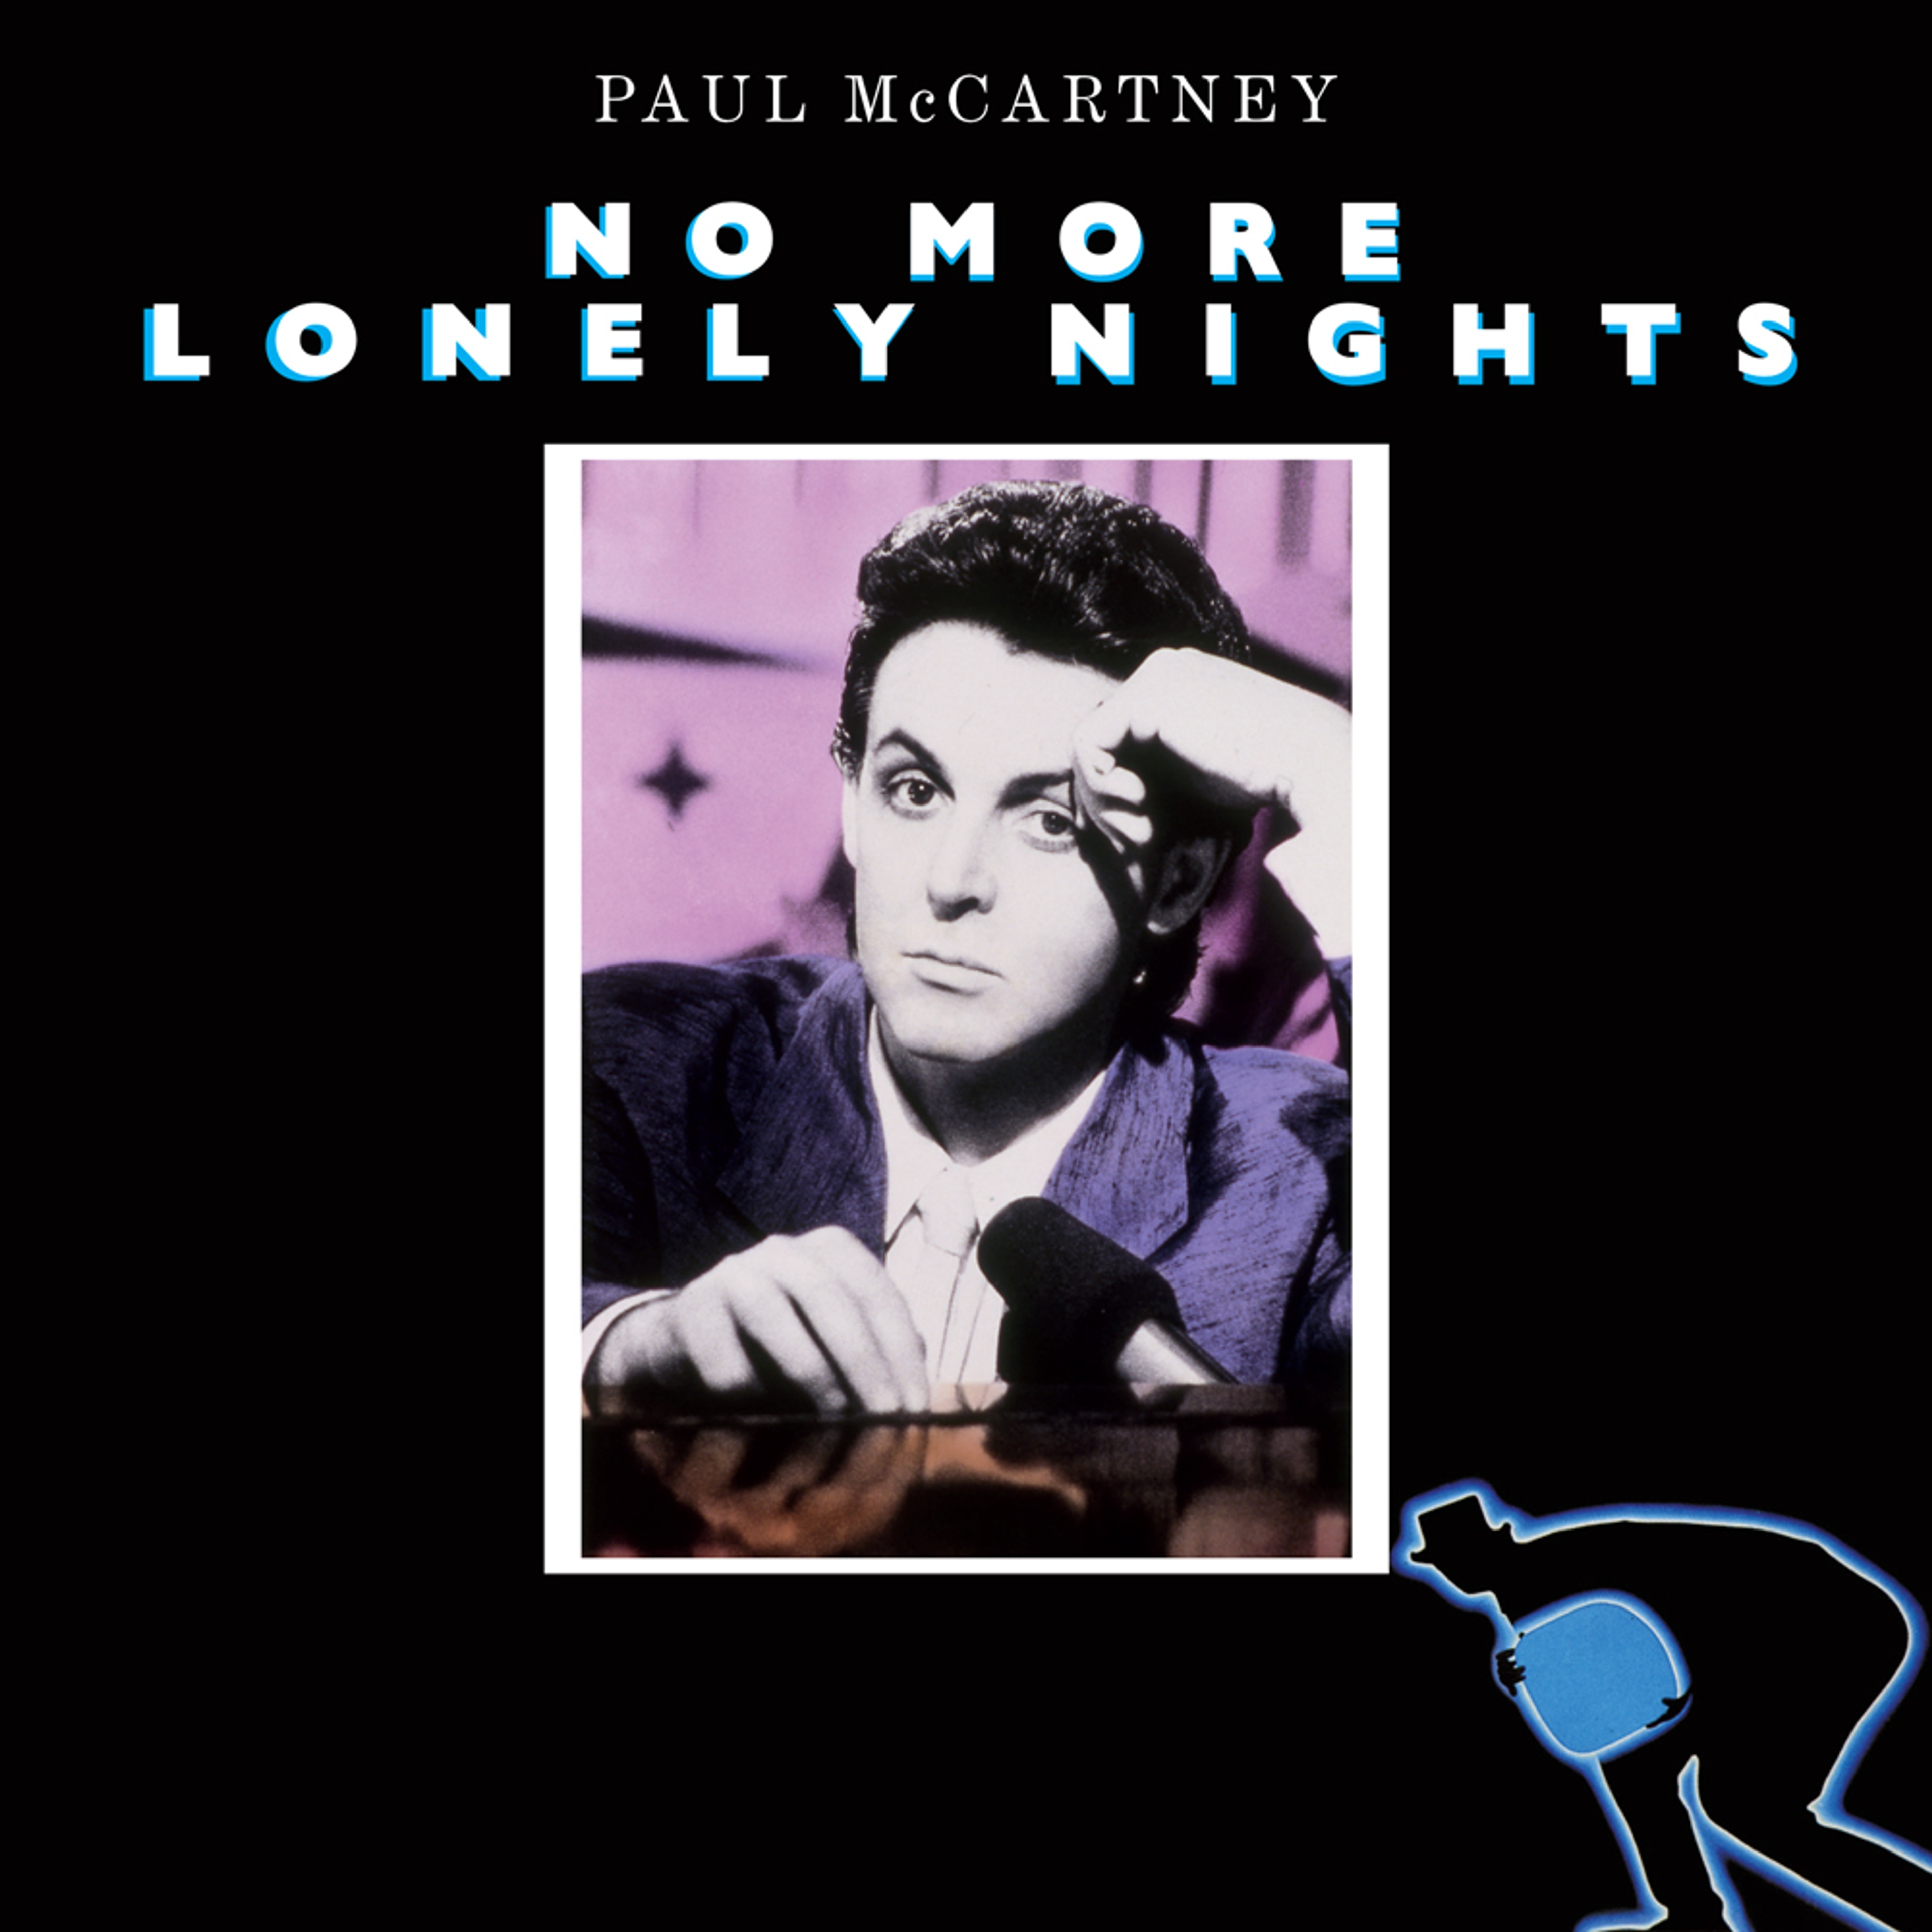 “No More Lonely Nights” Single artwork as featured in 'The 7" Singles Box'